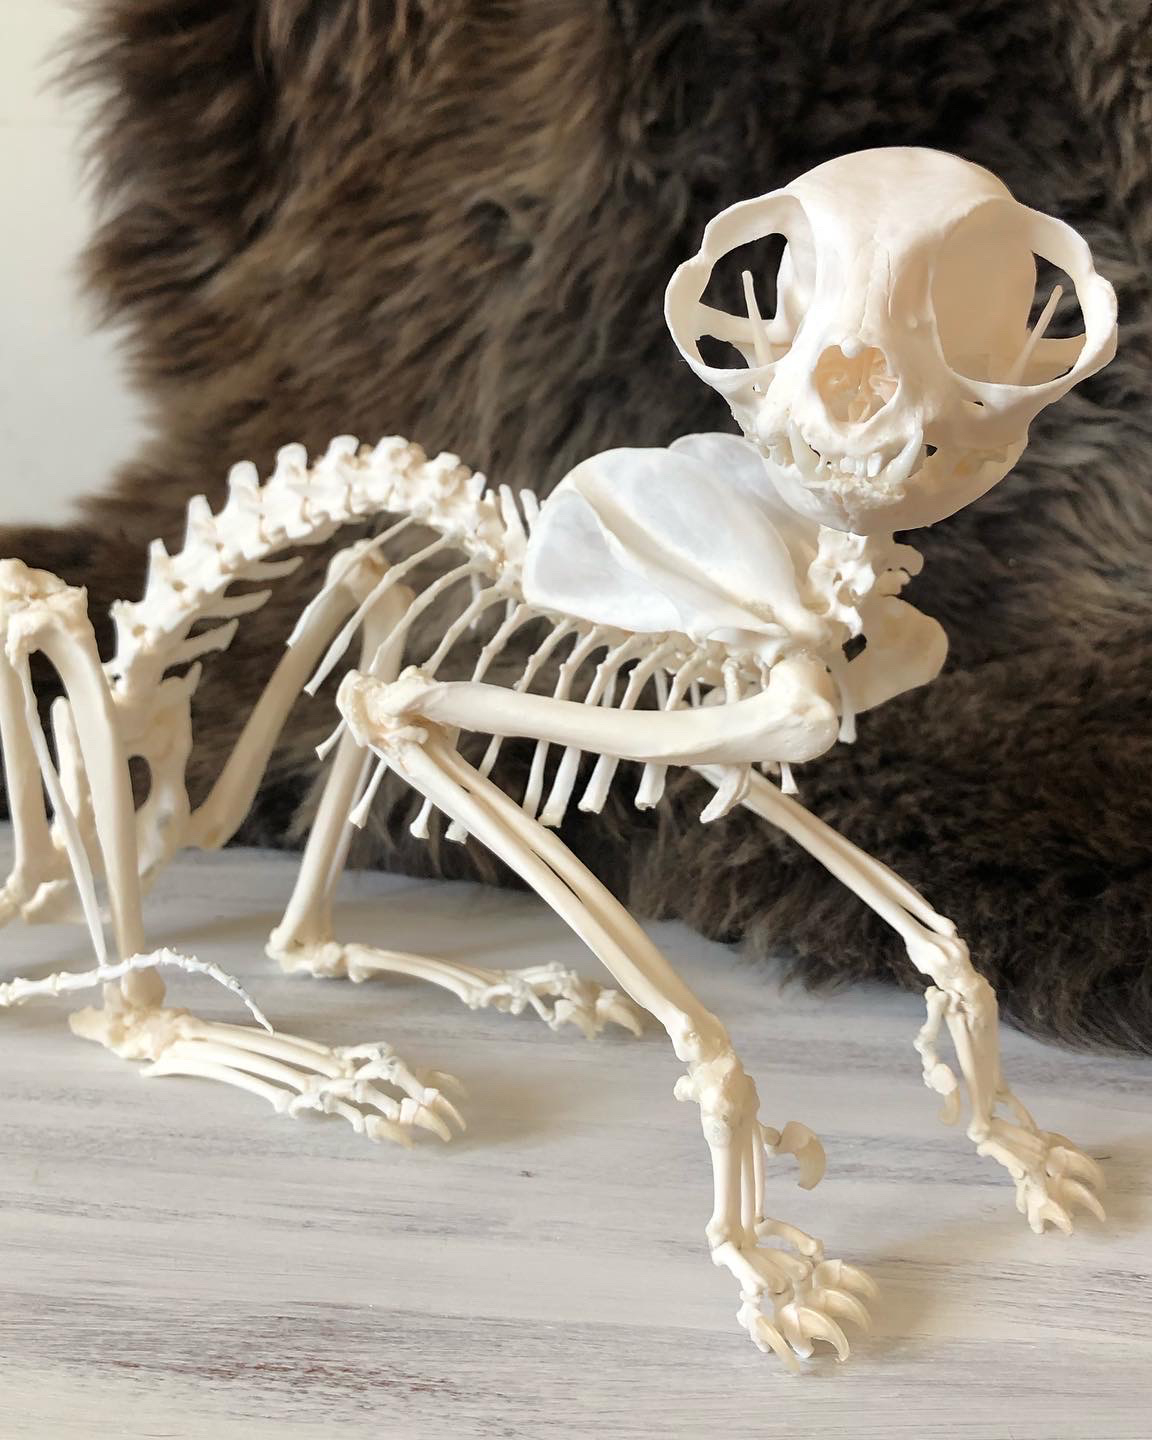 Side view of a fully articulated cat skeleton with the skull turned towards the camera